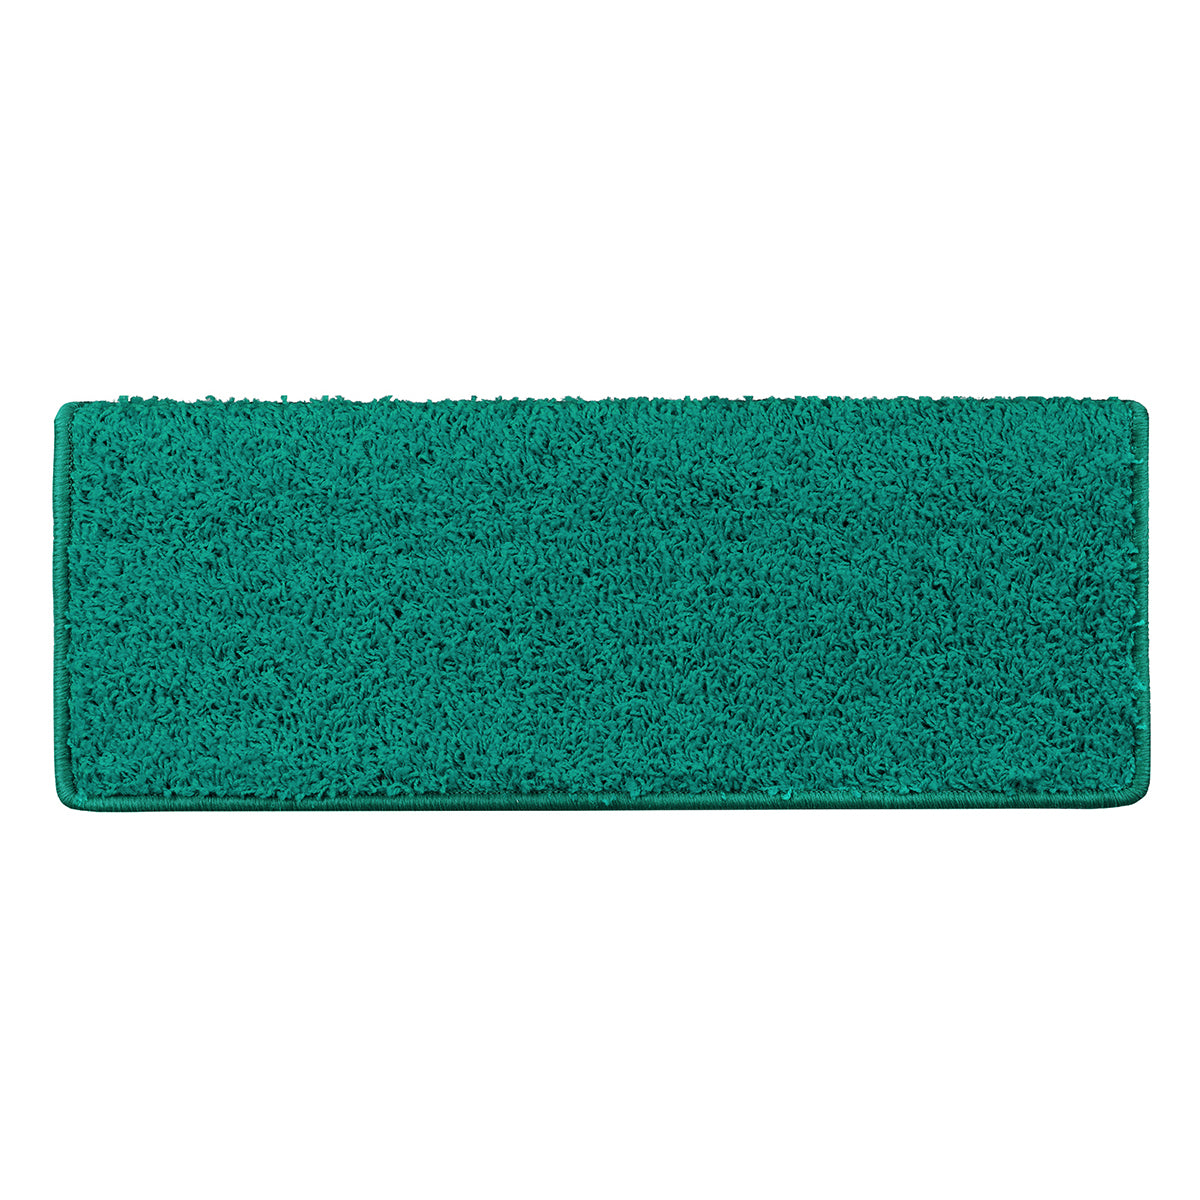 F3_fd-29082 | Turquoise | Rectangulaire